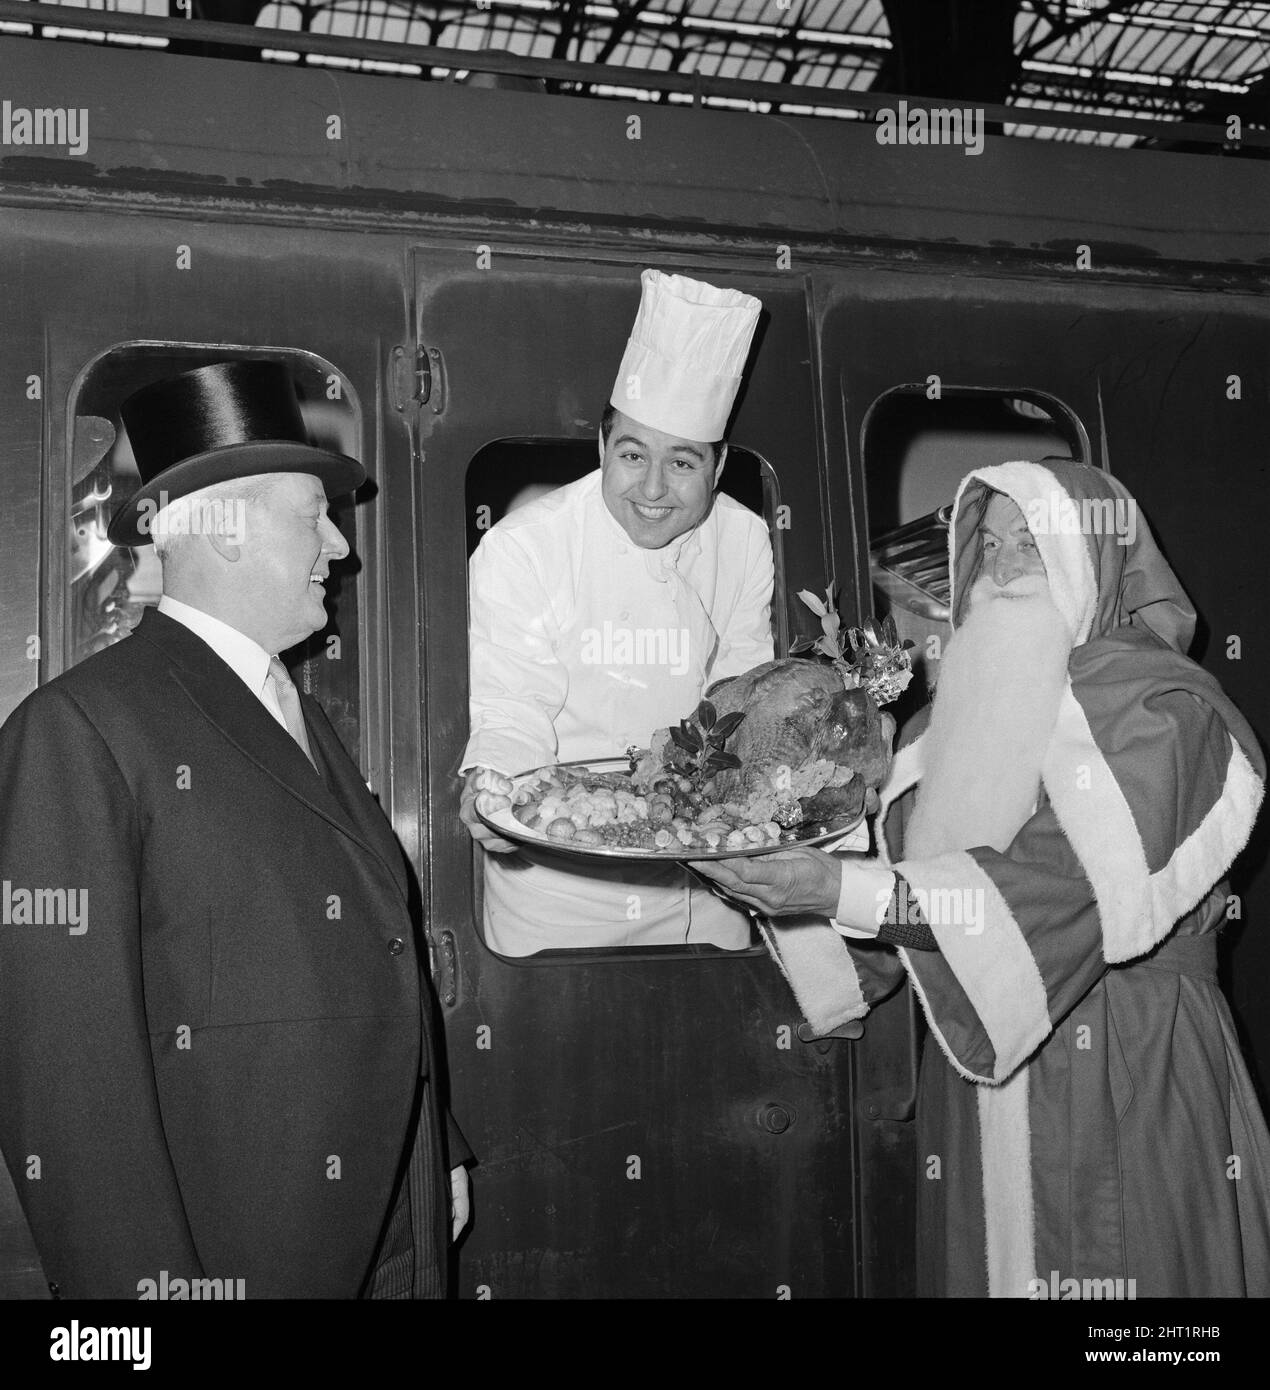 TURKEY TIME AT TURKEY STREET. When the 11.44am train left Liverpool Street Station today on board was a chef in full regalia accompanied by Santa Claus.  The chef , Mr Pedro Carol, was carrying a turkey weighing 20lbs that ws garnished on a silver platter.  To see the party off the Station Master wore his top hat.  The destination of the party and the turkey was Turkey Street Station about 20 minutes ride from Liverpool Street Station.  At Turkey Street a group of local children met the turkey and Father Christmas and the whole party marched through Turkey Street Village to a pub called The Tu Stock Photo